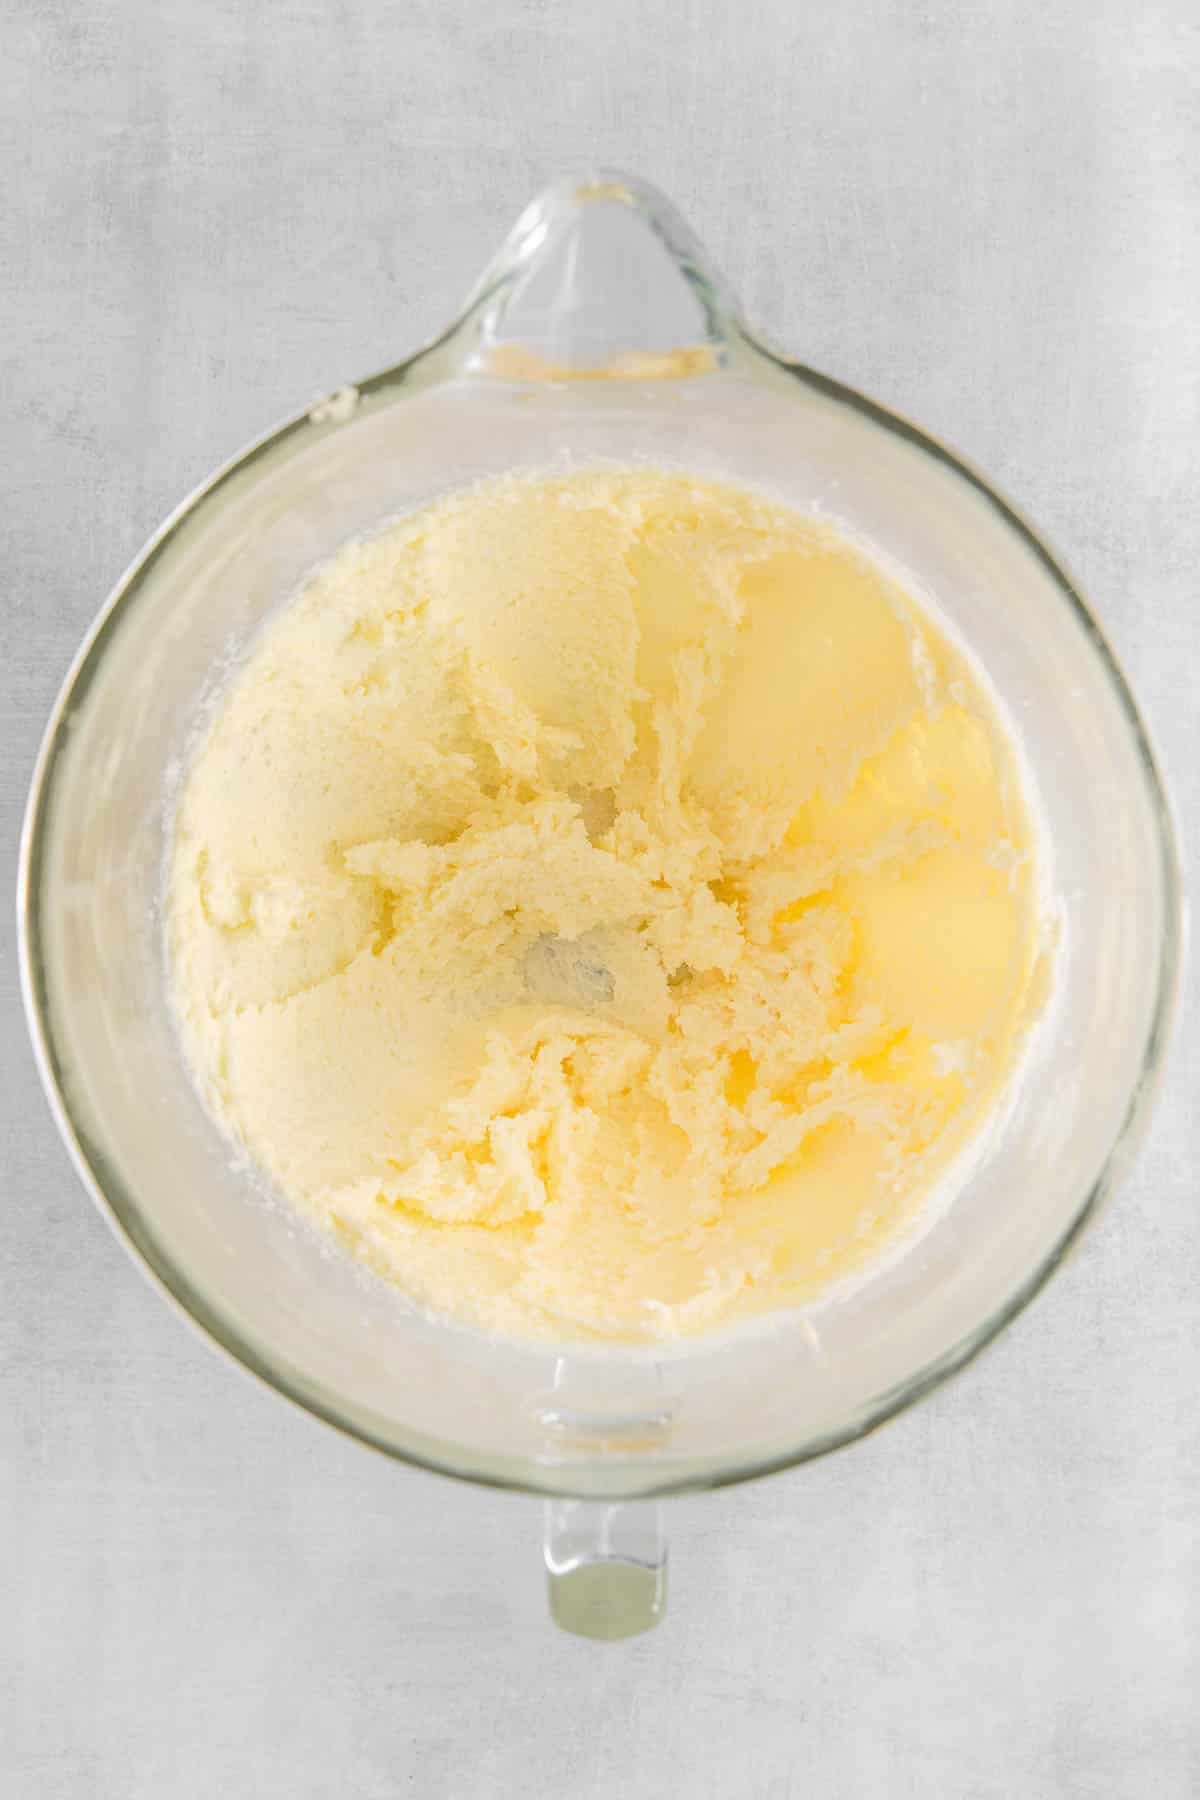 Butter and granulated sugar whipped together in glass mixing bowl.